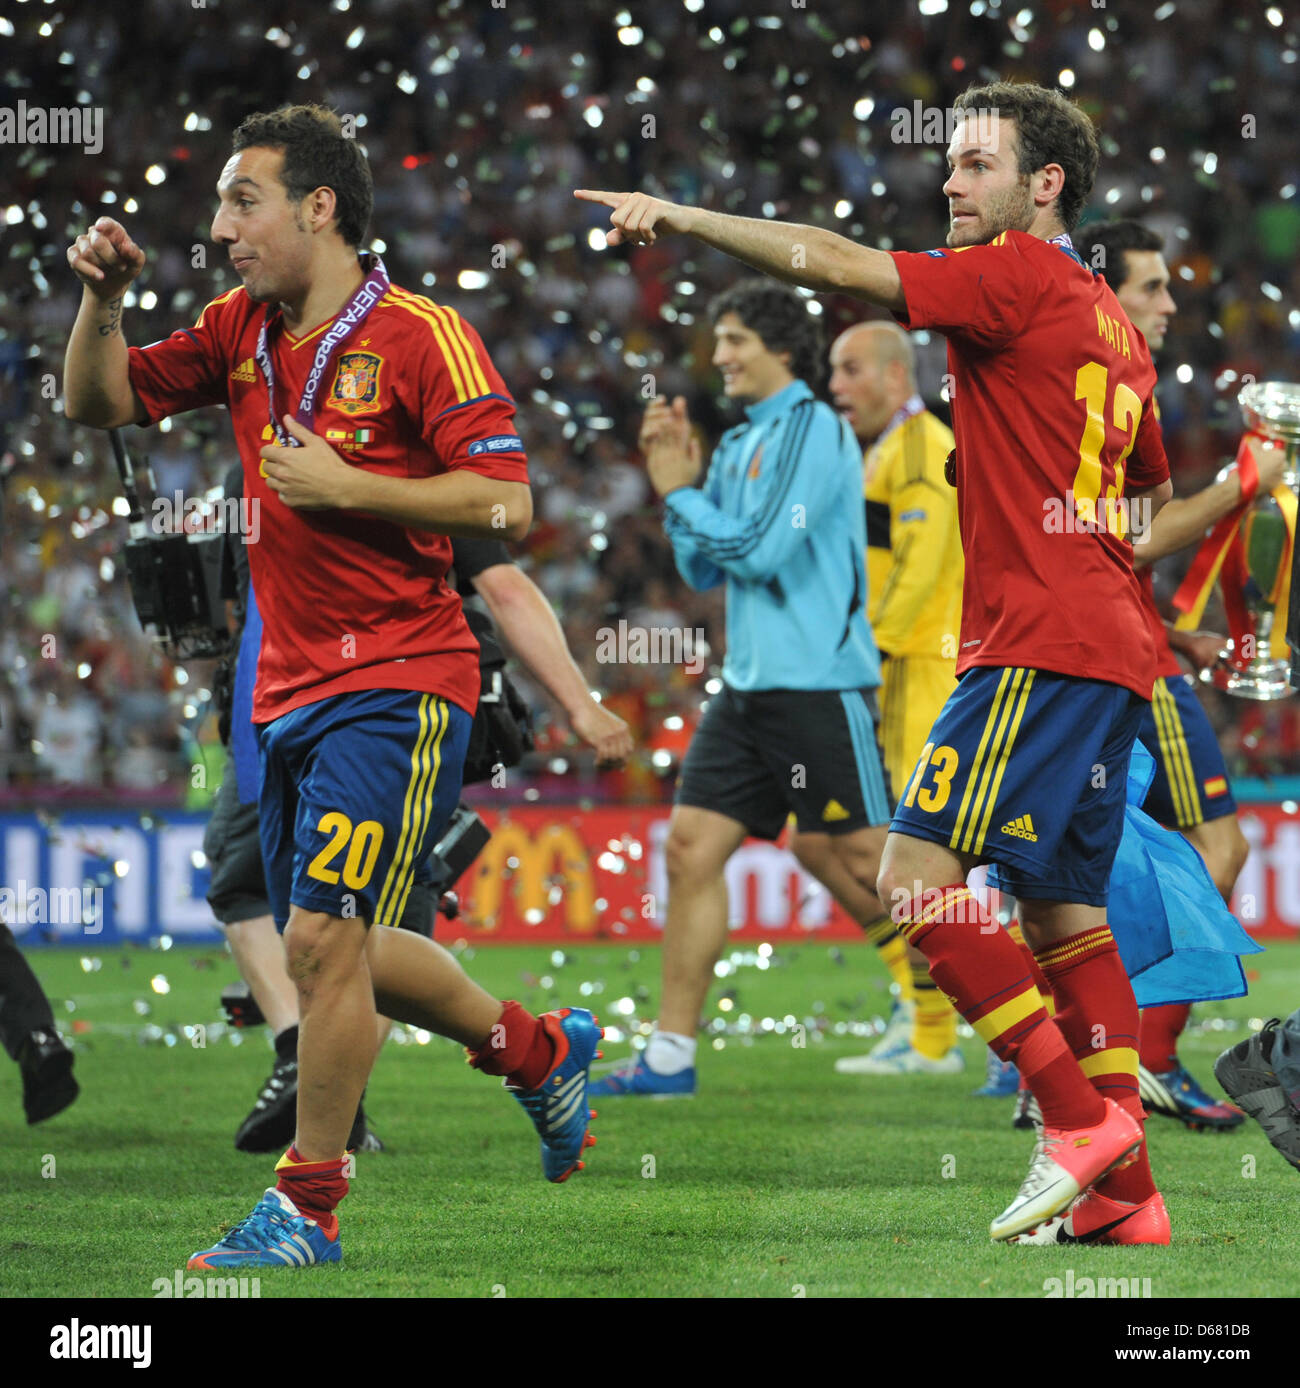 Spain's Santi Cazorla (L) and Juan Mata (R) celebrate after winning the UEFA EURO 2012 final soccer match Spain vs. Italy at the Olympic Stadium in Kiev, Ukraine, 01 July 2012. Photo: Andreas Gebert dpa (Please refer to chapters 7 and 8 of http://dpaq.de/Ziovh for UEFA Euro 2012 Terms & Conditions) Stock Photo